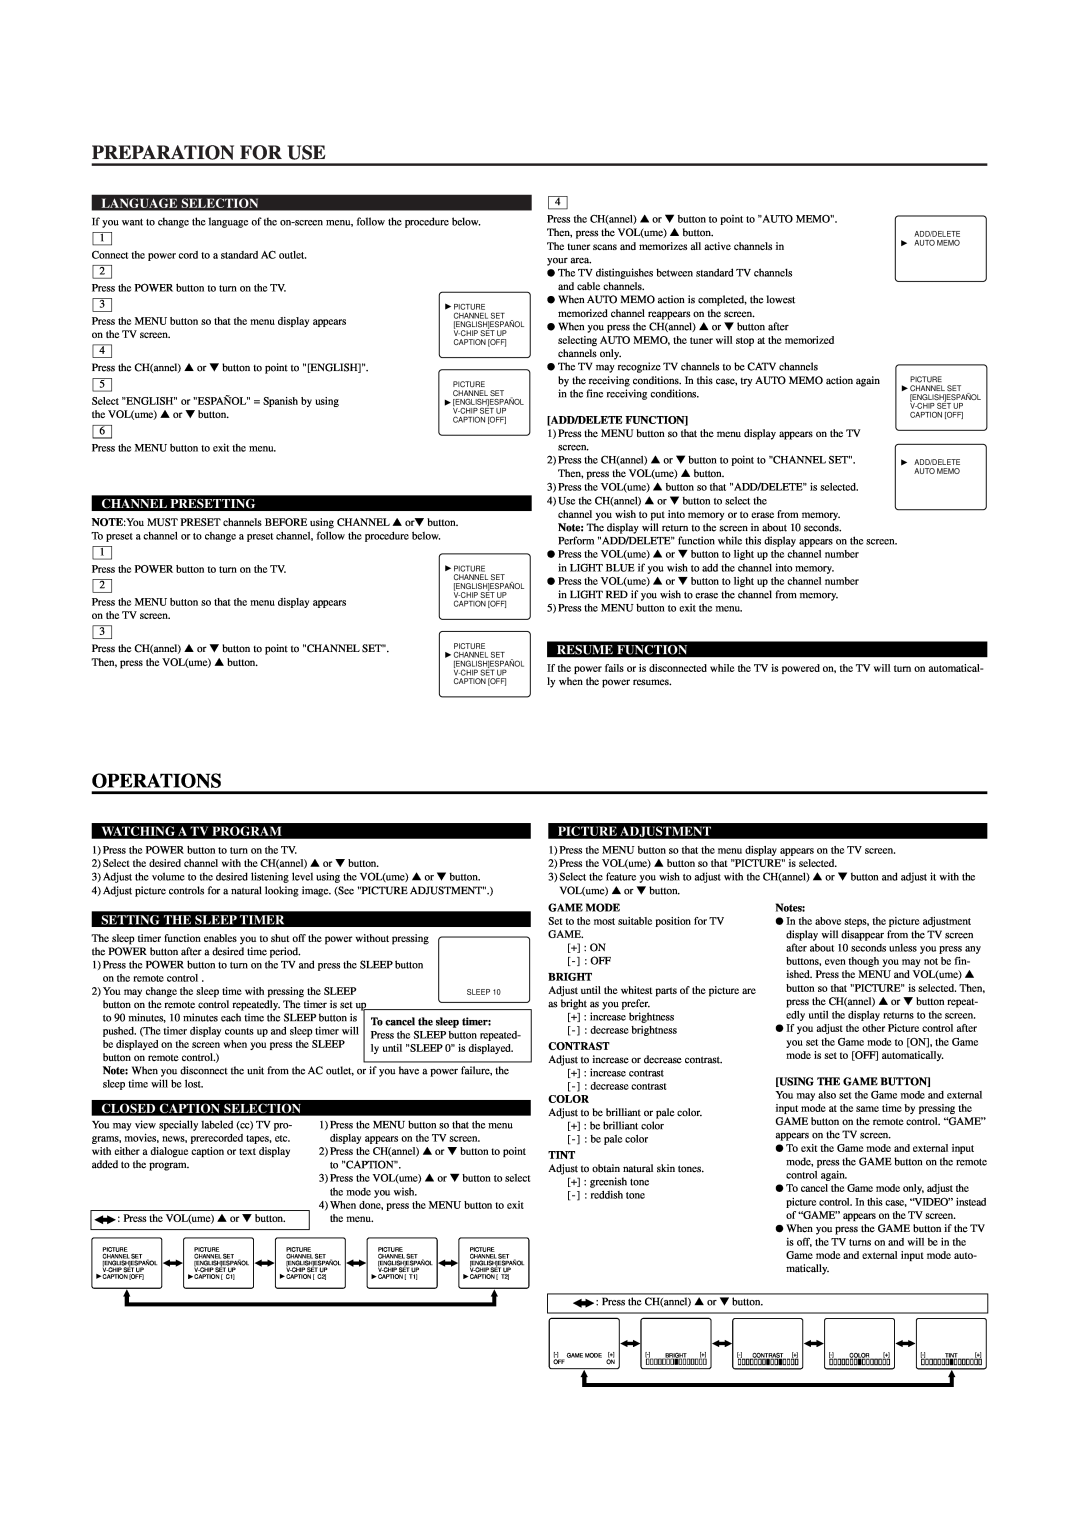 Sylvania 6419TBF Preparation For Use, Operations, Language Selection, Channel Presetting, Resume Function, Game Mode, Tint 